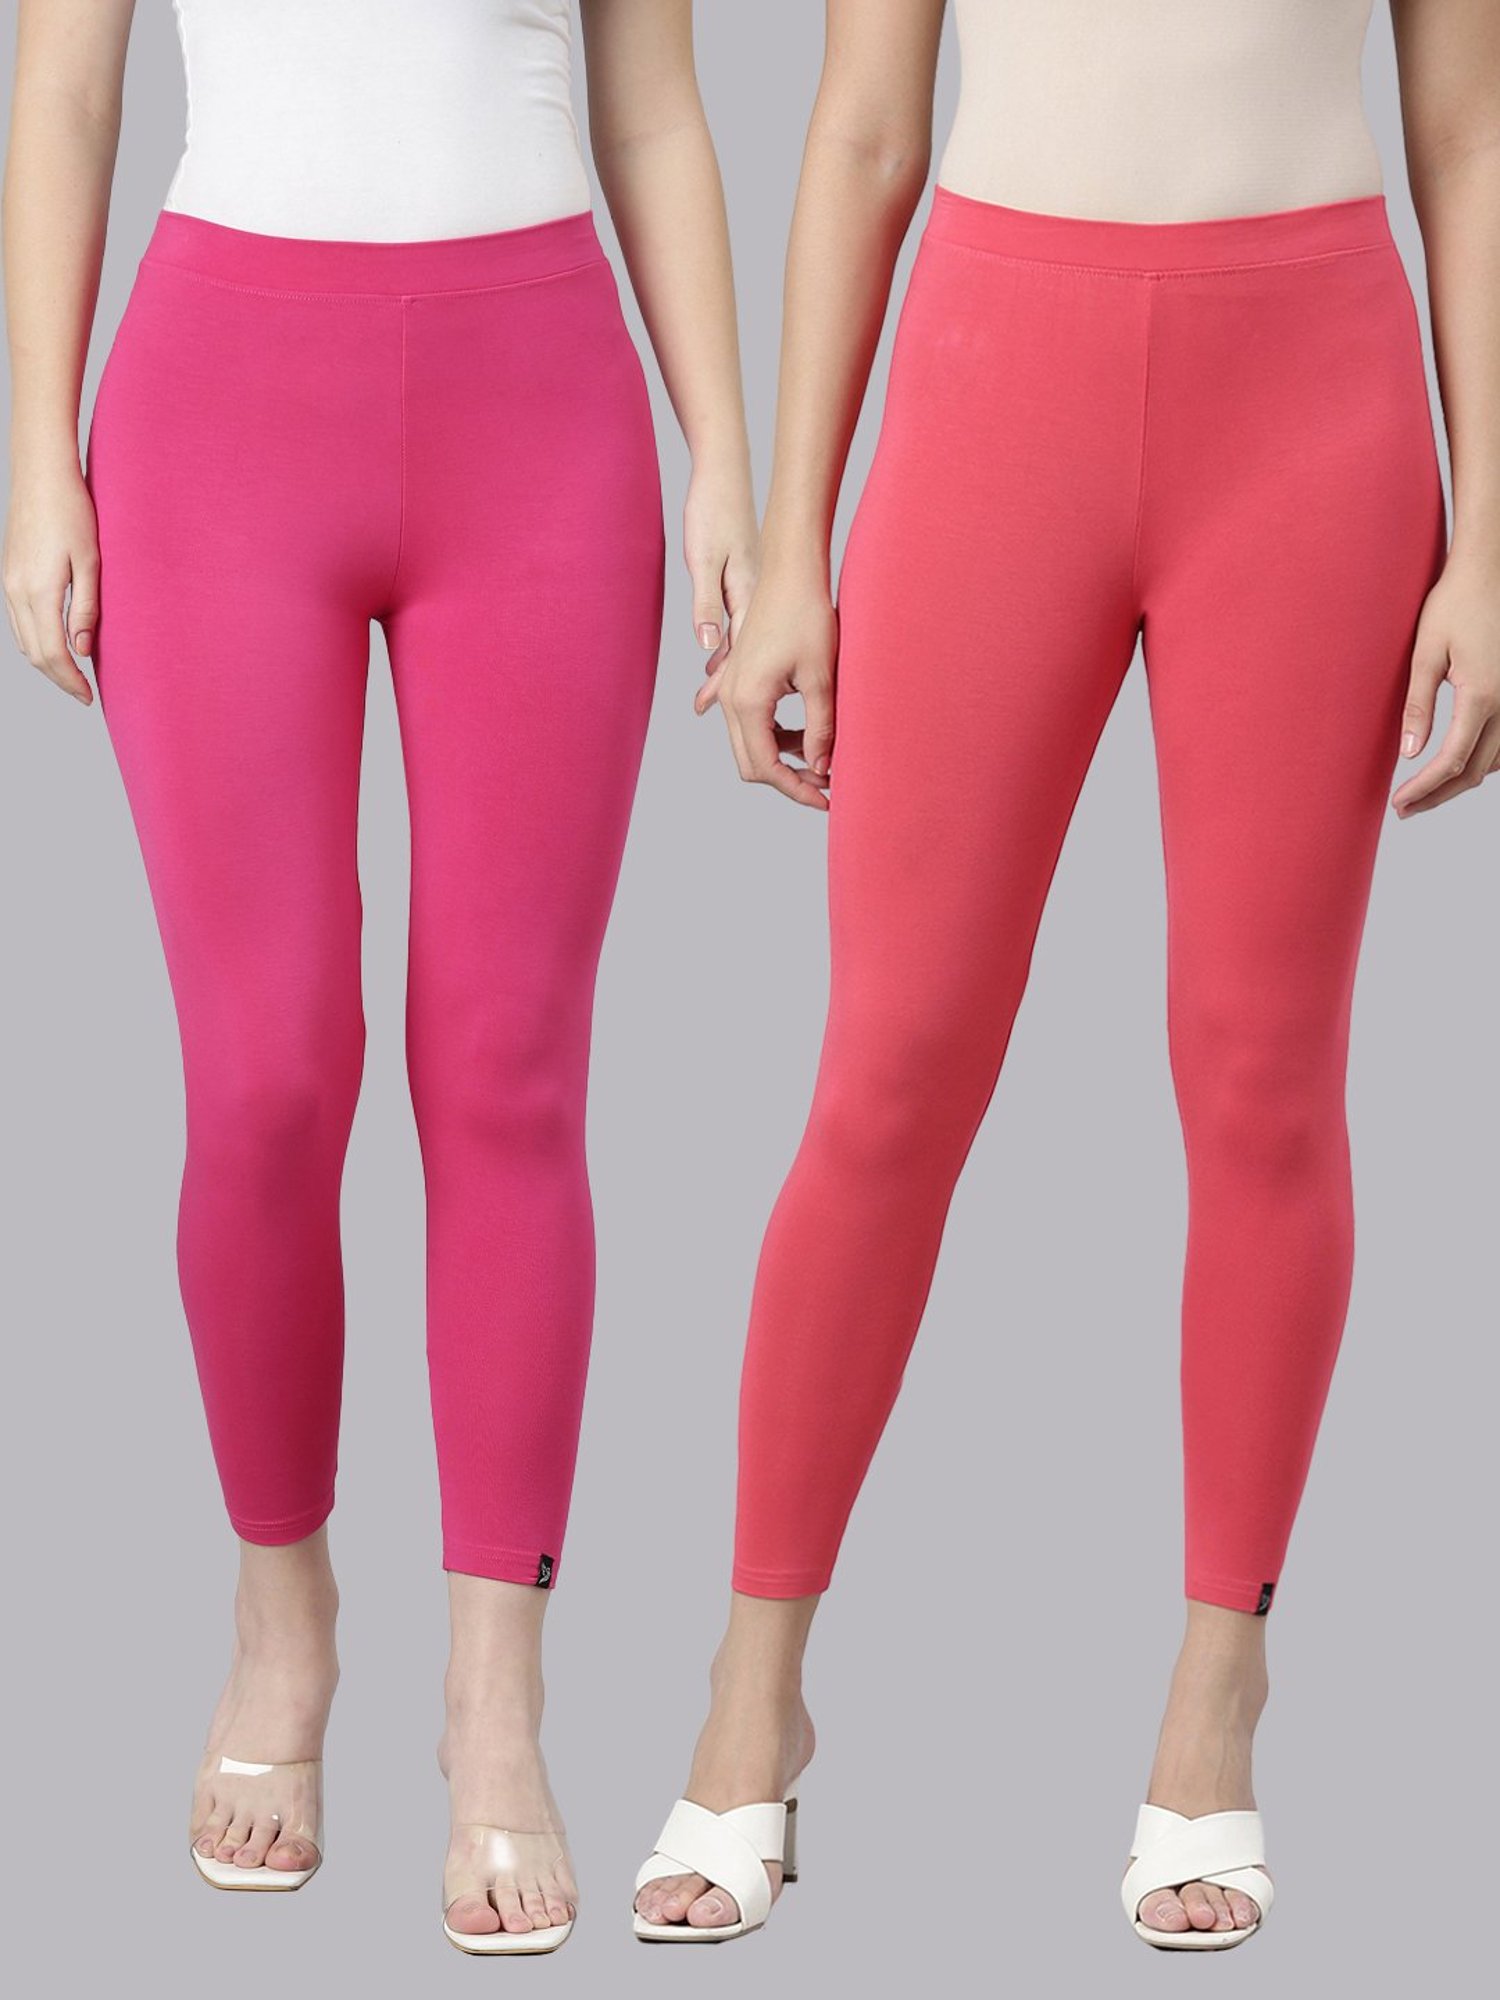 TWIN BIRDS Pink & Peach Plain Cropped Leggings - Pack Of 2